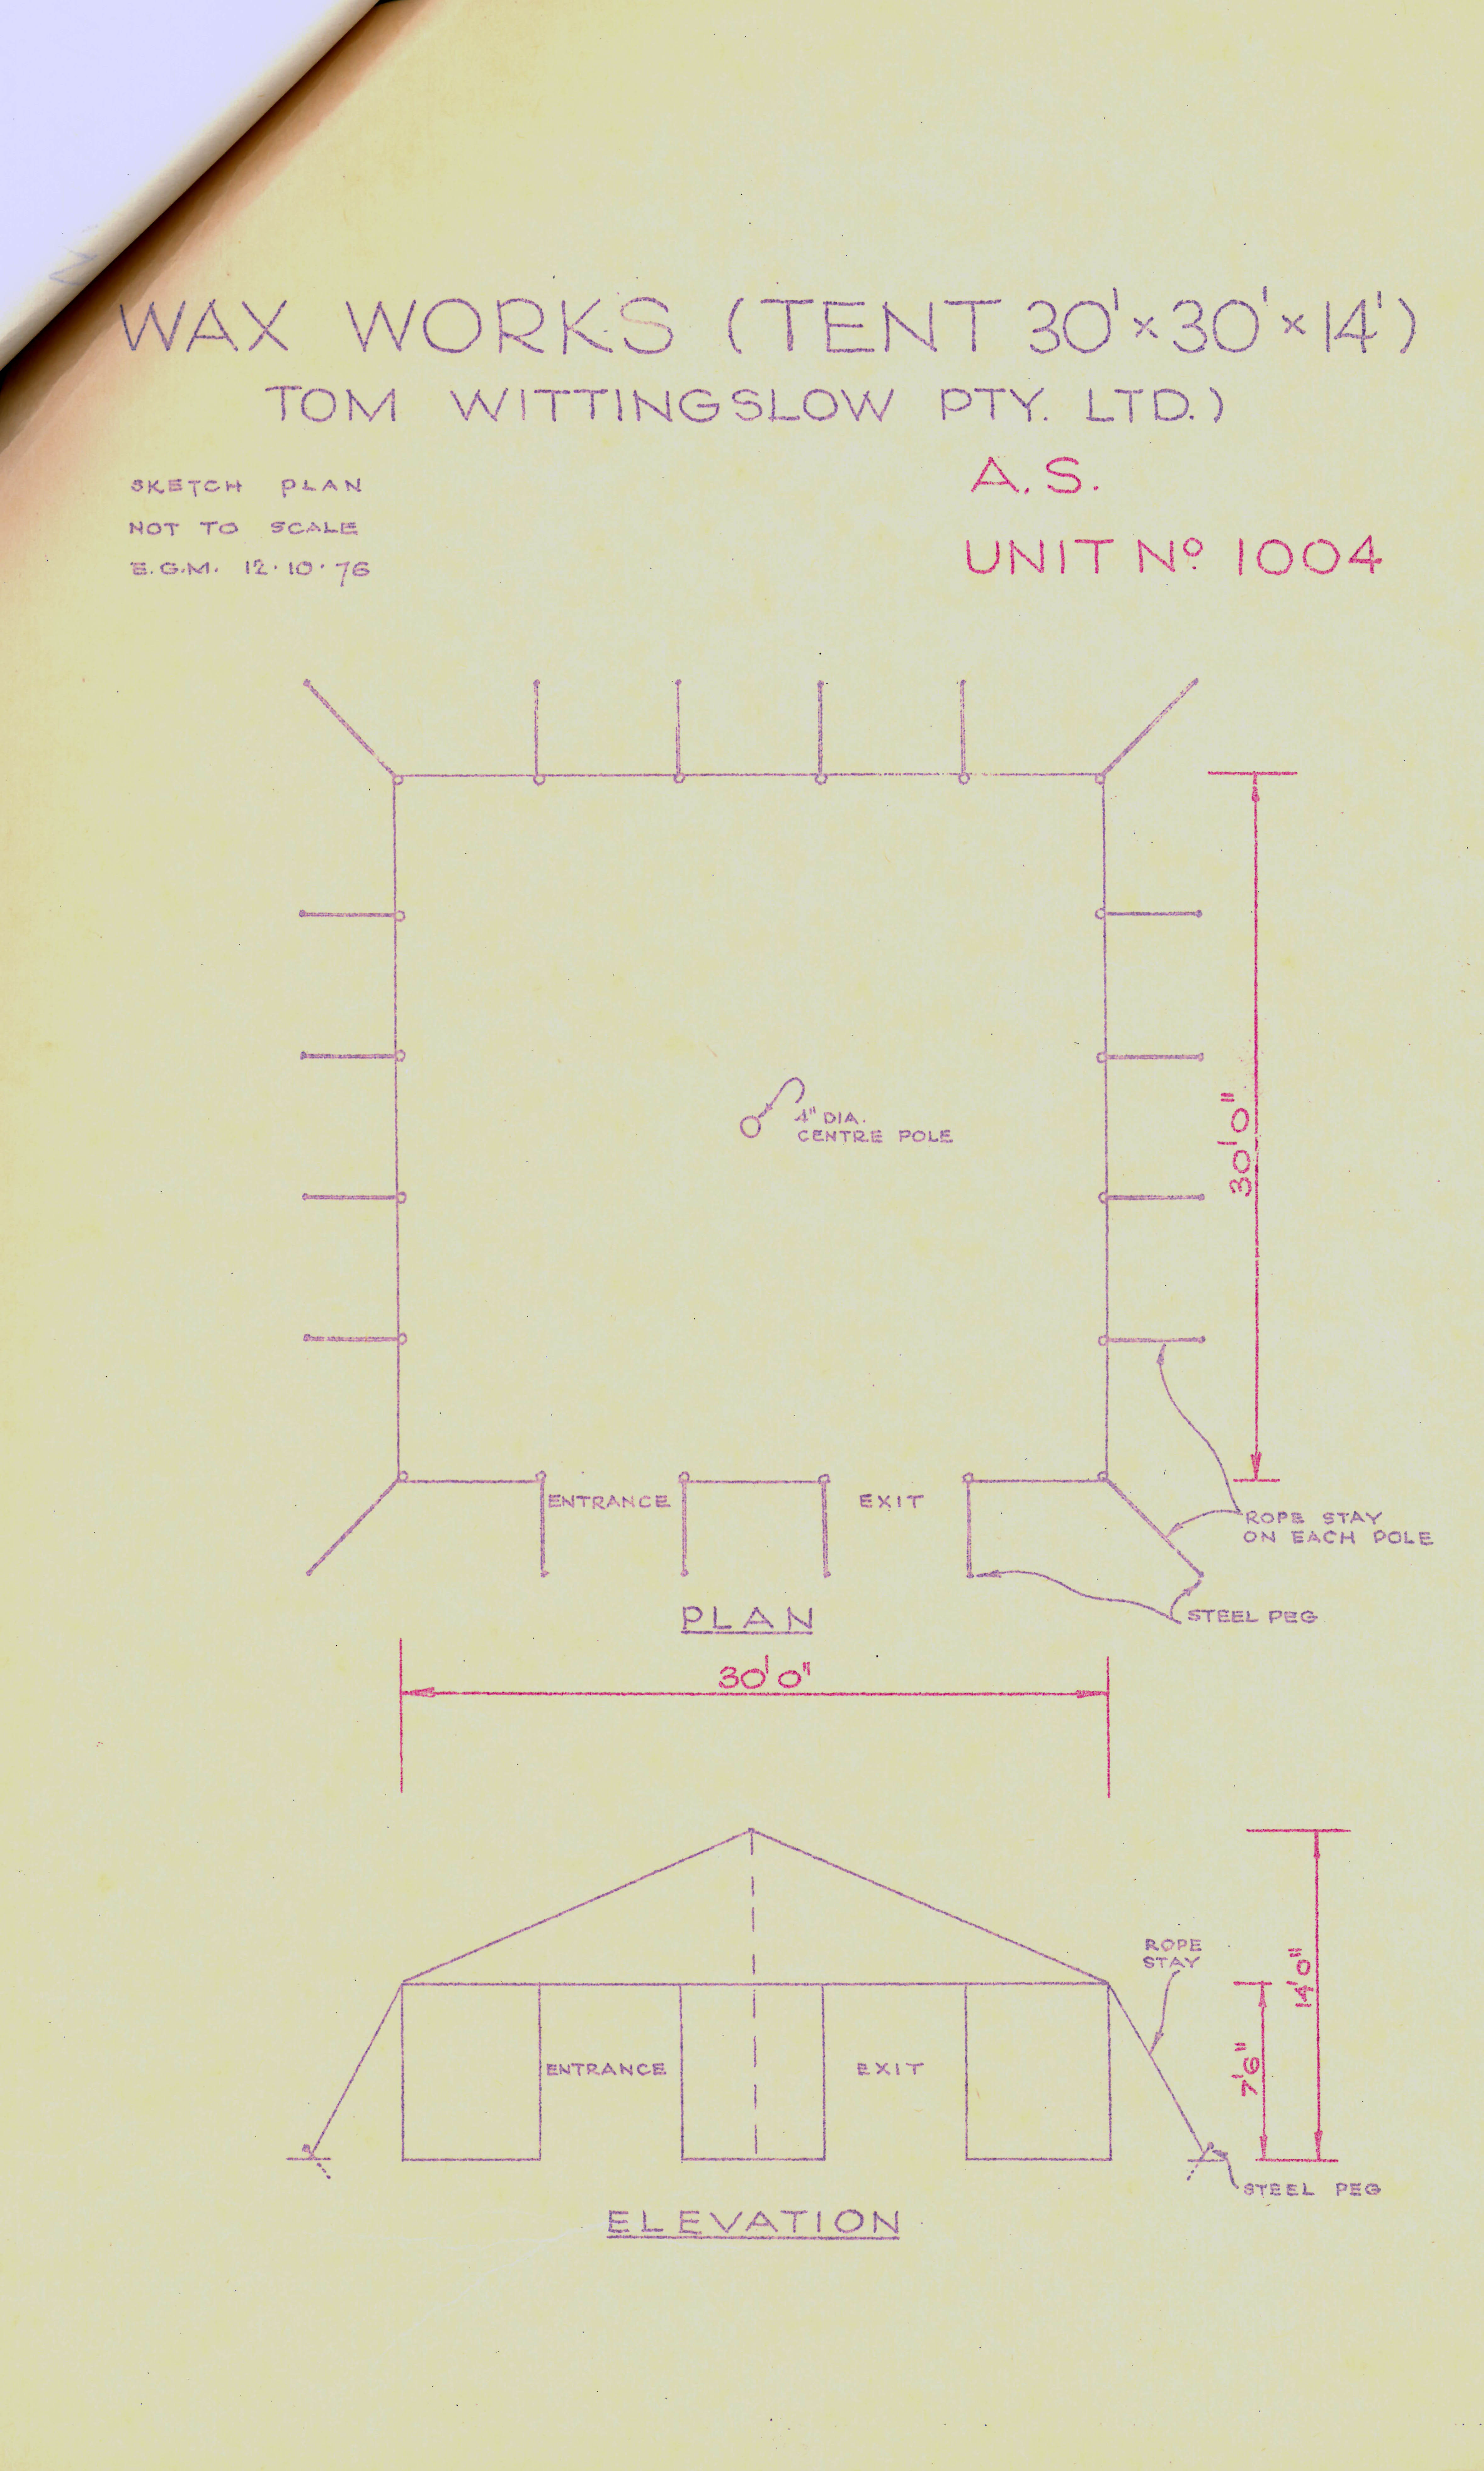 plans for the wax works tent, a square shaped, very simple drawing